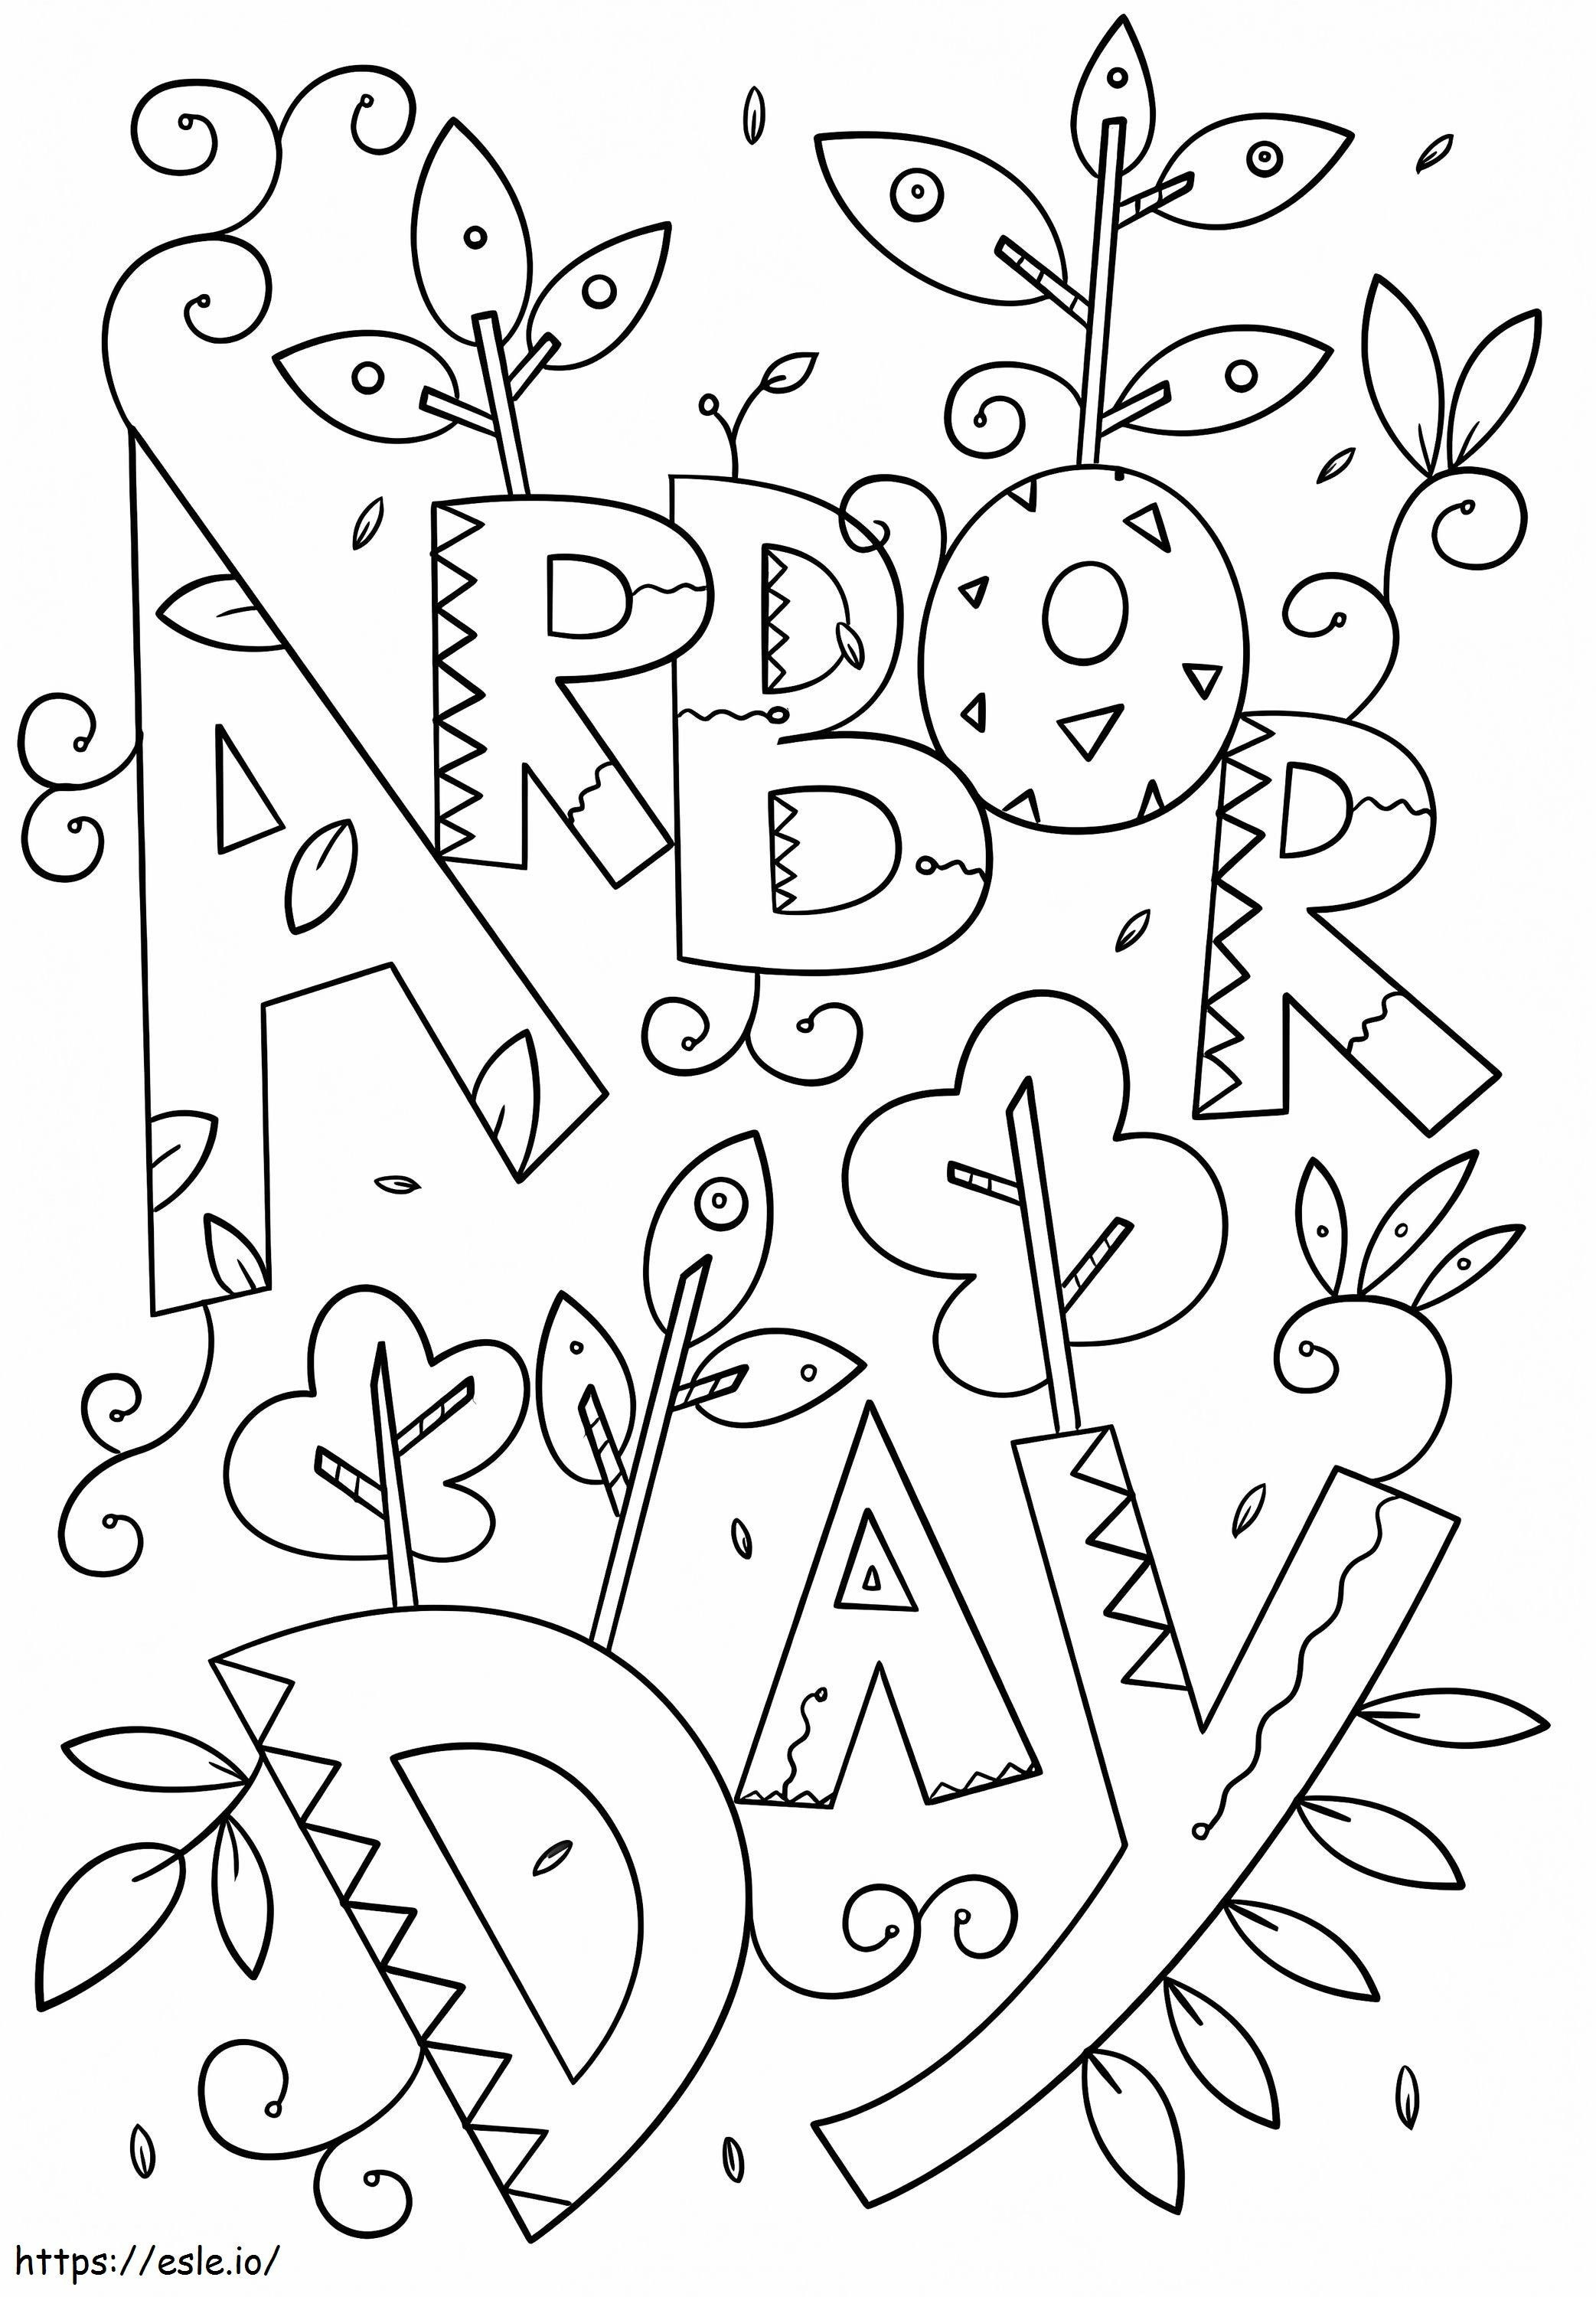 Arbor Day coloring page